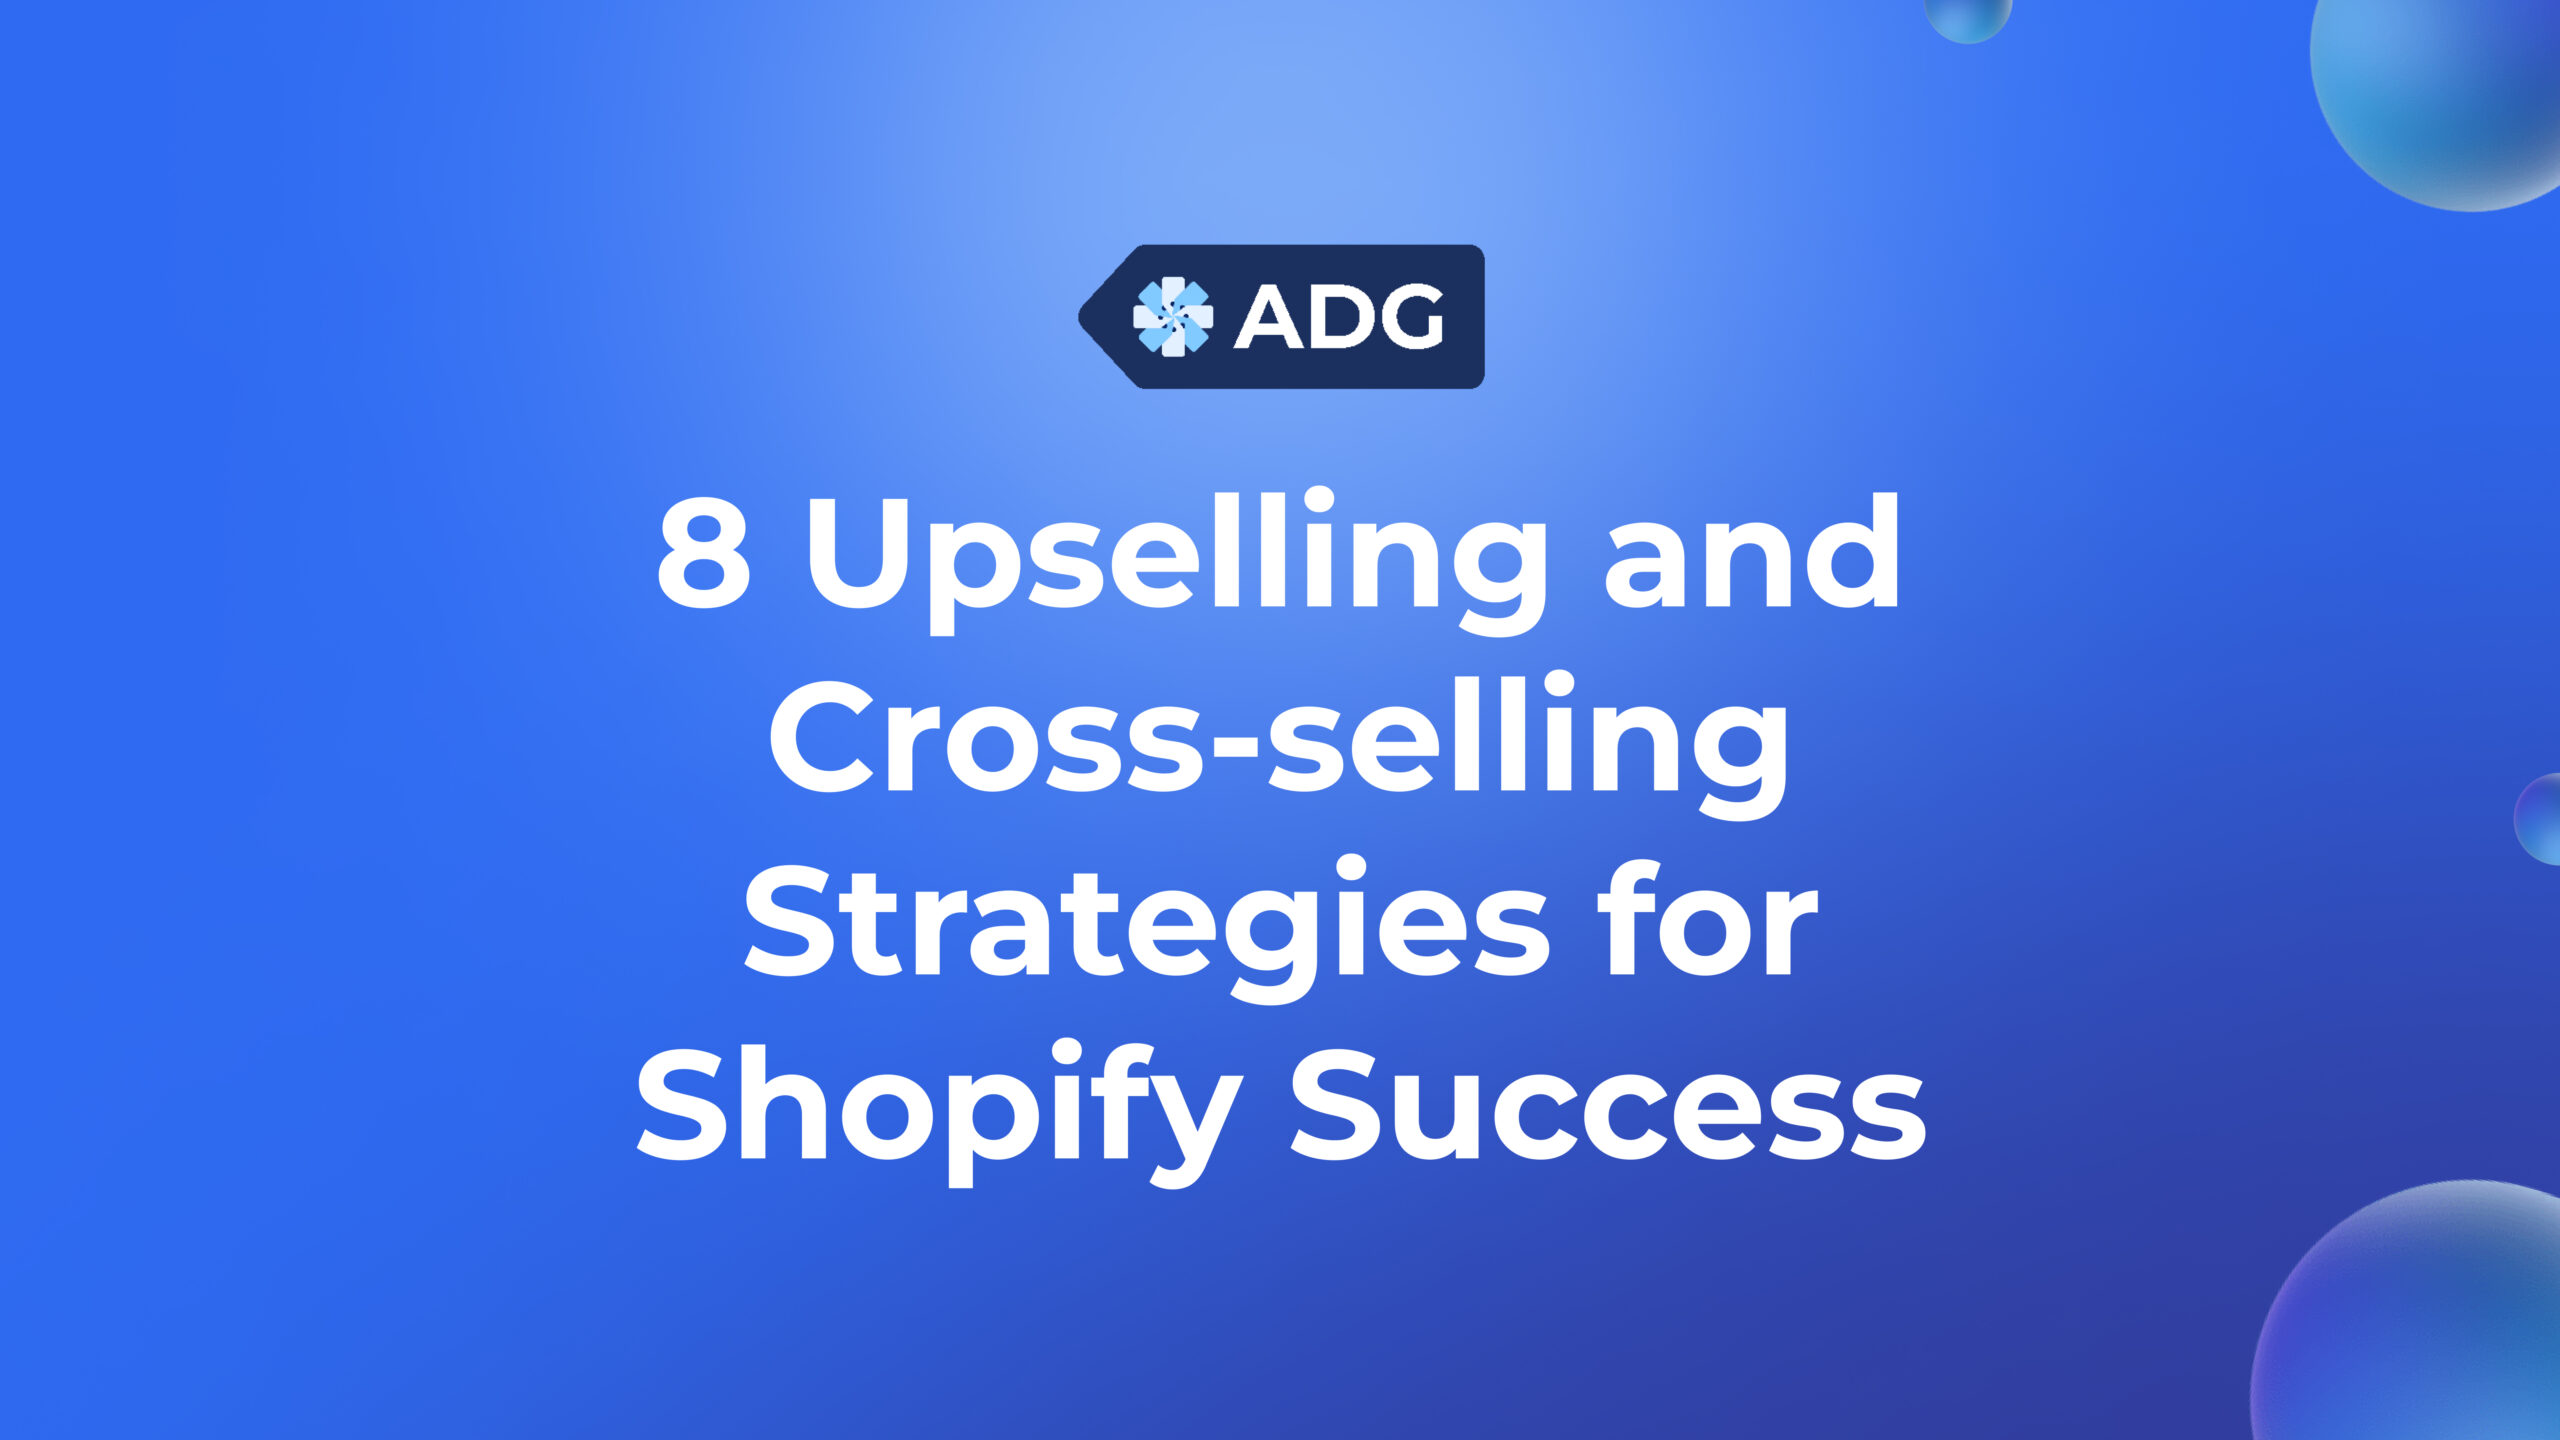 Image Displaying Upsell vs. Cross-sell and 8 Upselling and Cross-selling Strategies for Shopify Success